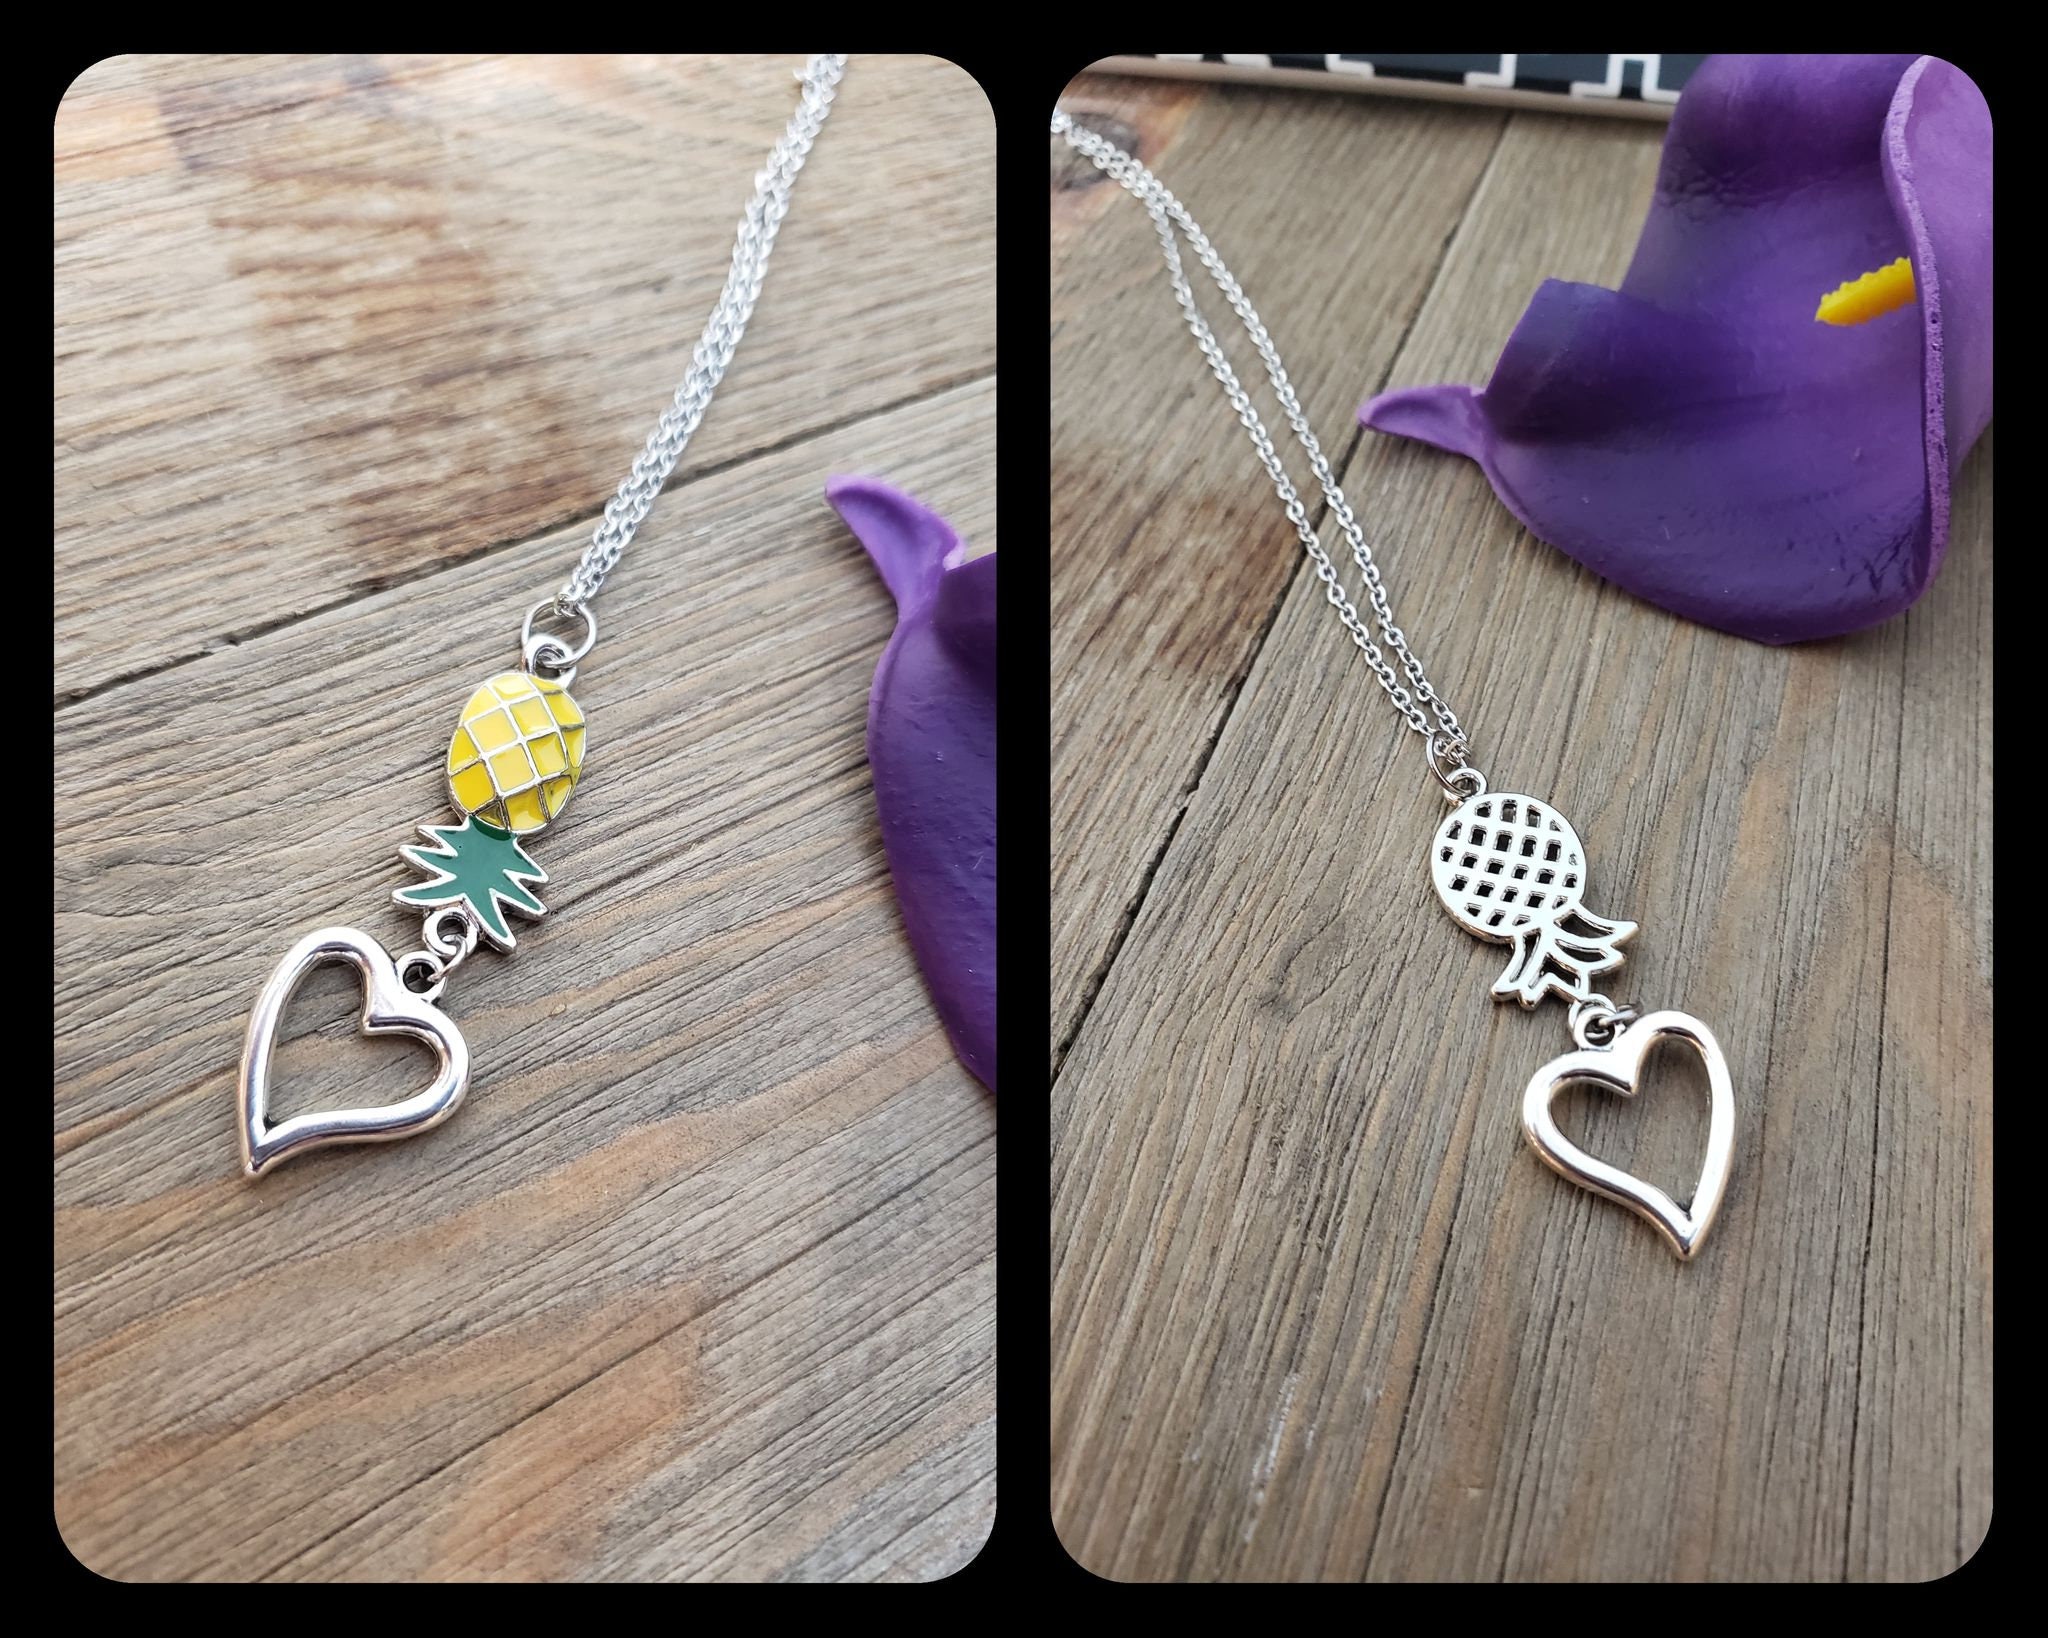 Upside Down Pineapple Necklace Swinger Mature Swing Time